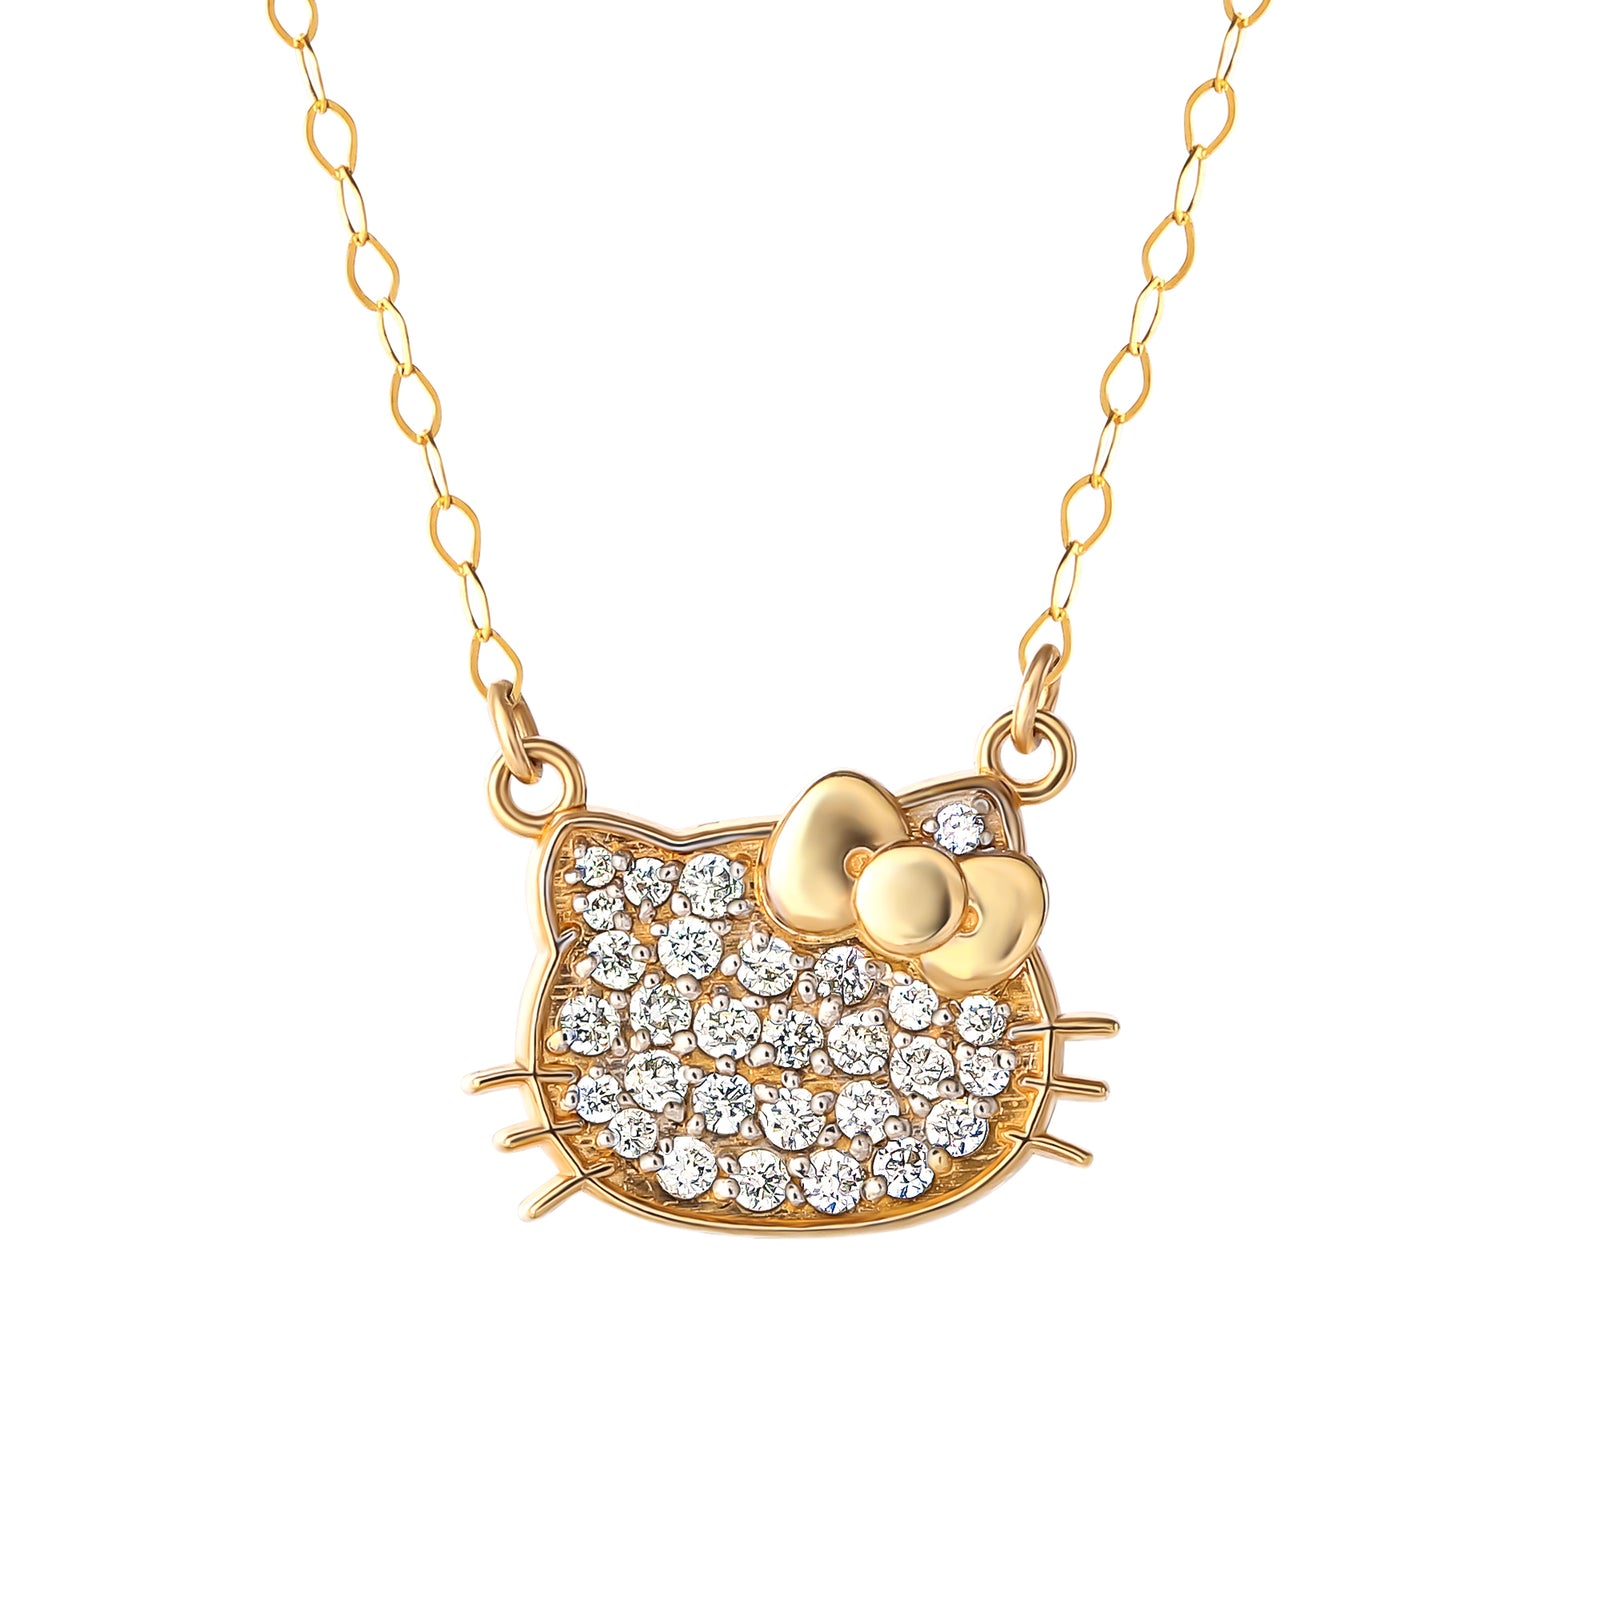 Sanrio Hello Kitty Yellow Gold Plated Crystal Kuromi Necklace - 18 Chain, Officially Licensed Authentic - Black, White